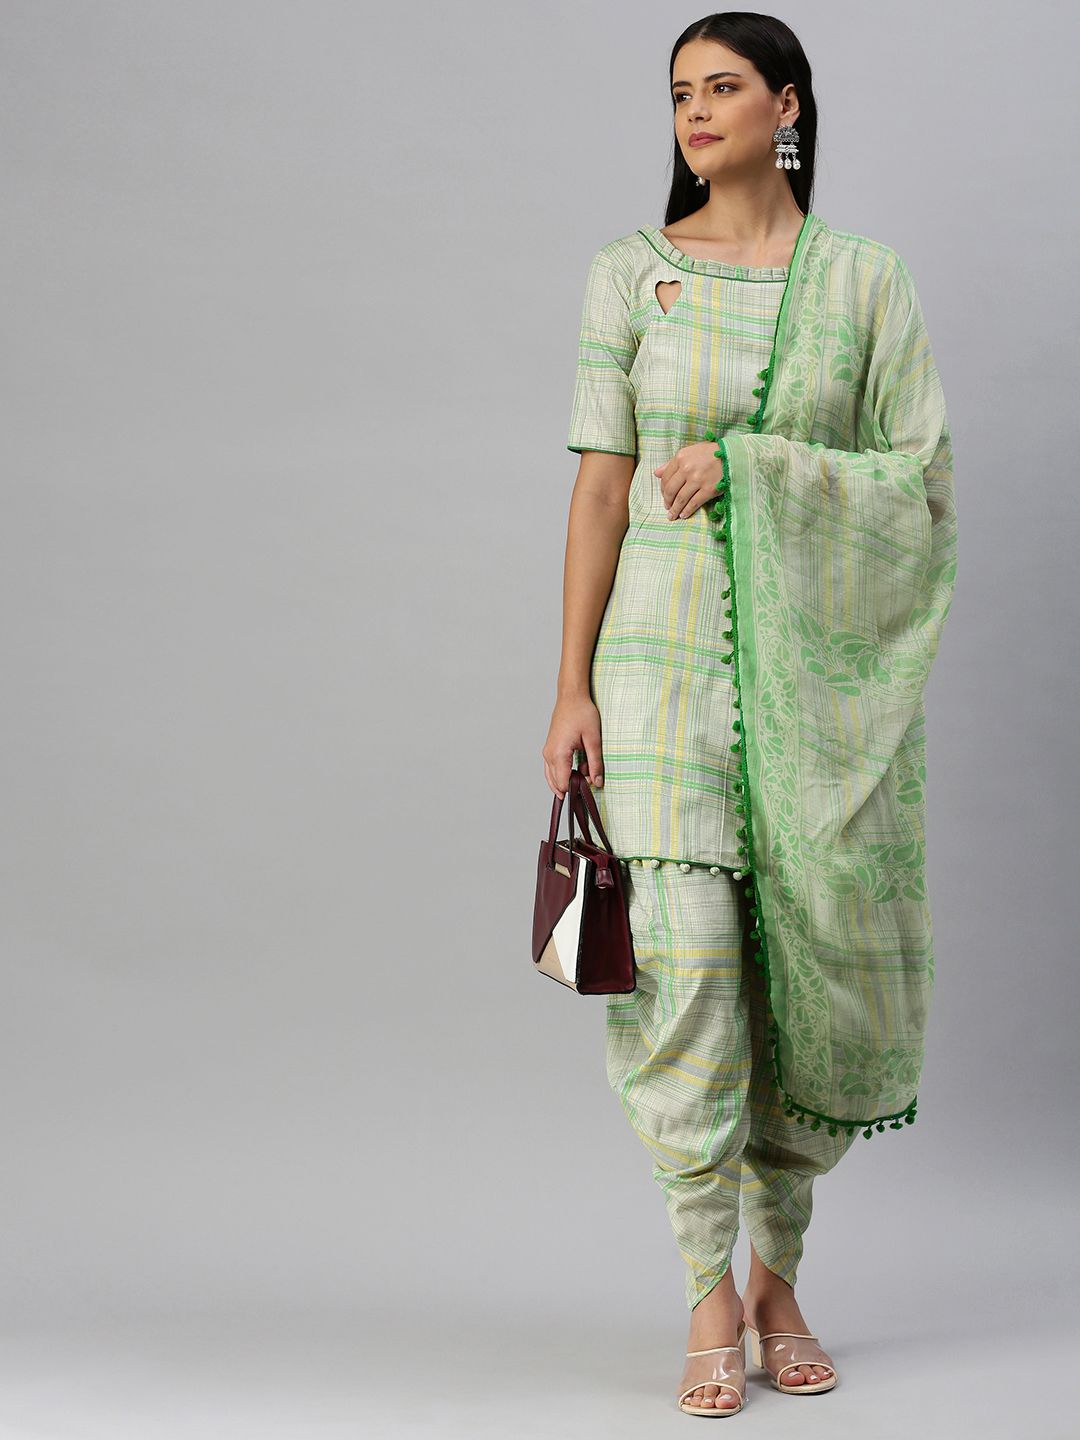 SHAVYA Green & Beige Checked Cotton Blend Unstitched Kurta Set Dress Material Price in India